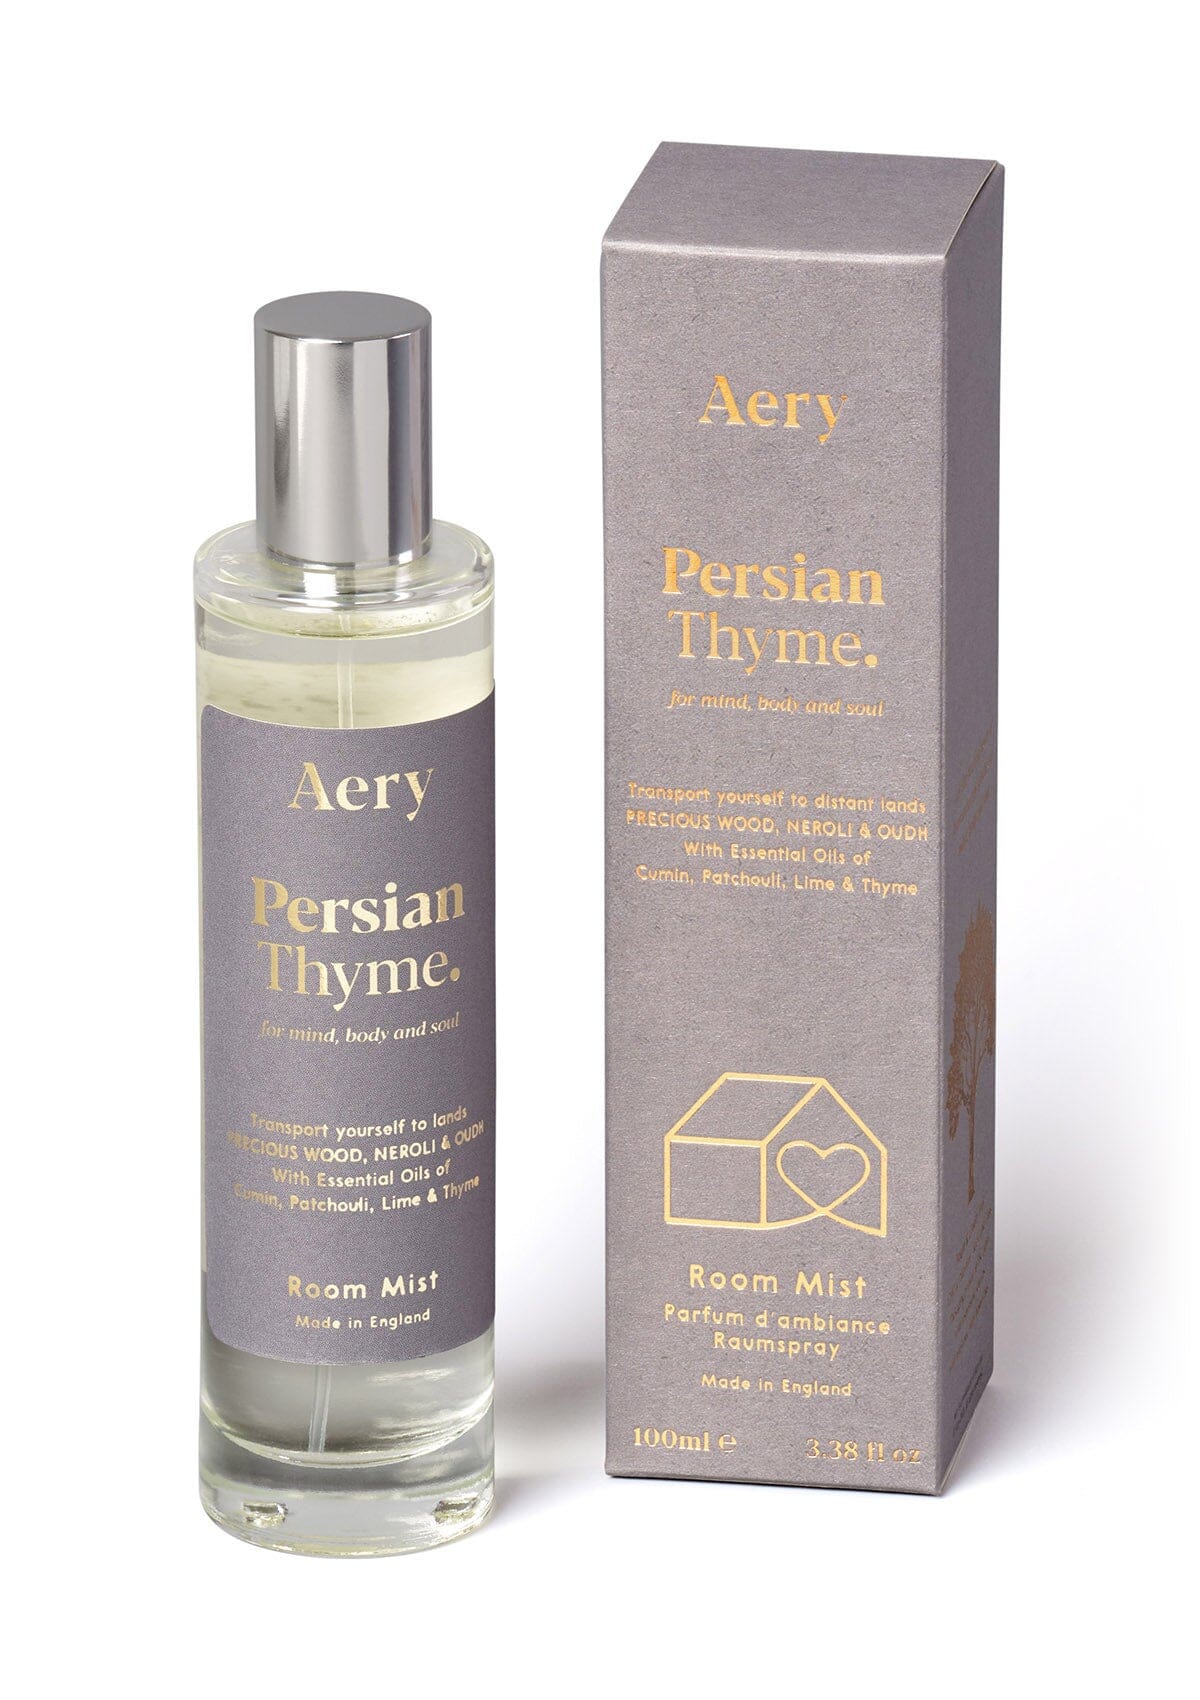 Grey Persian Thyme room mist displayed next to product packaging by Arey on white background 